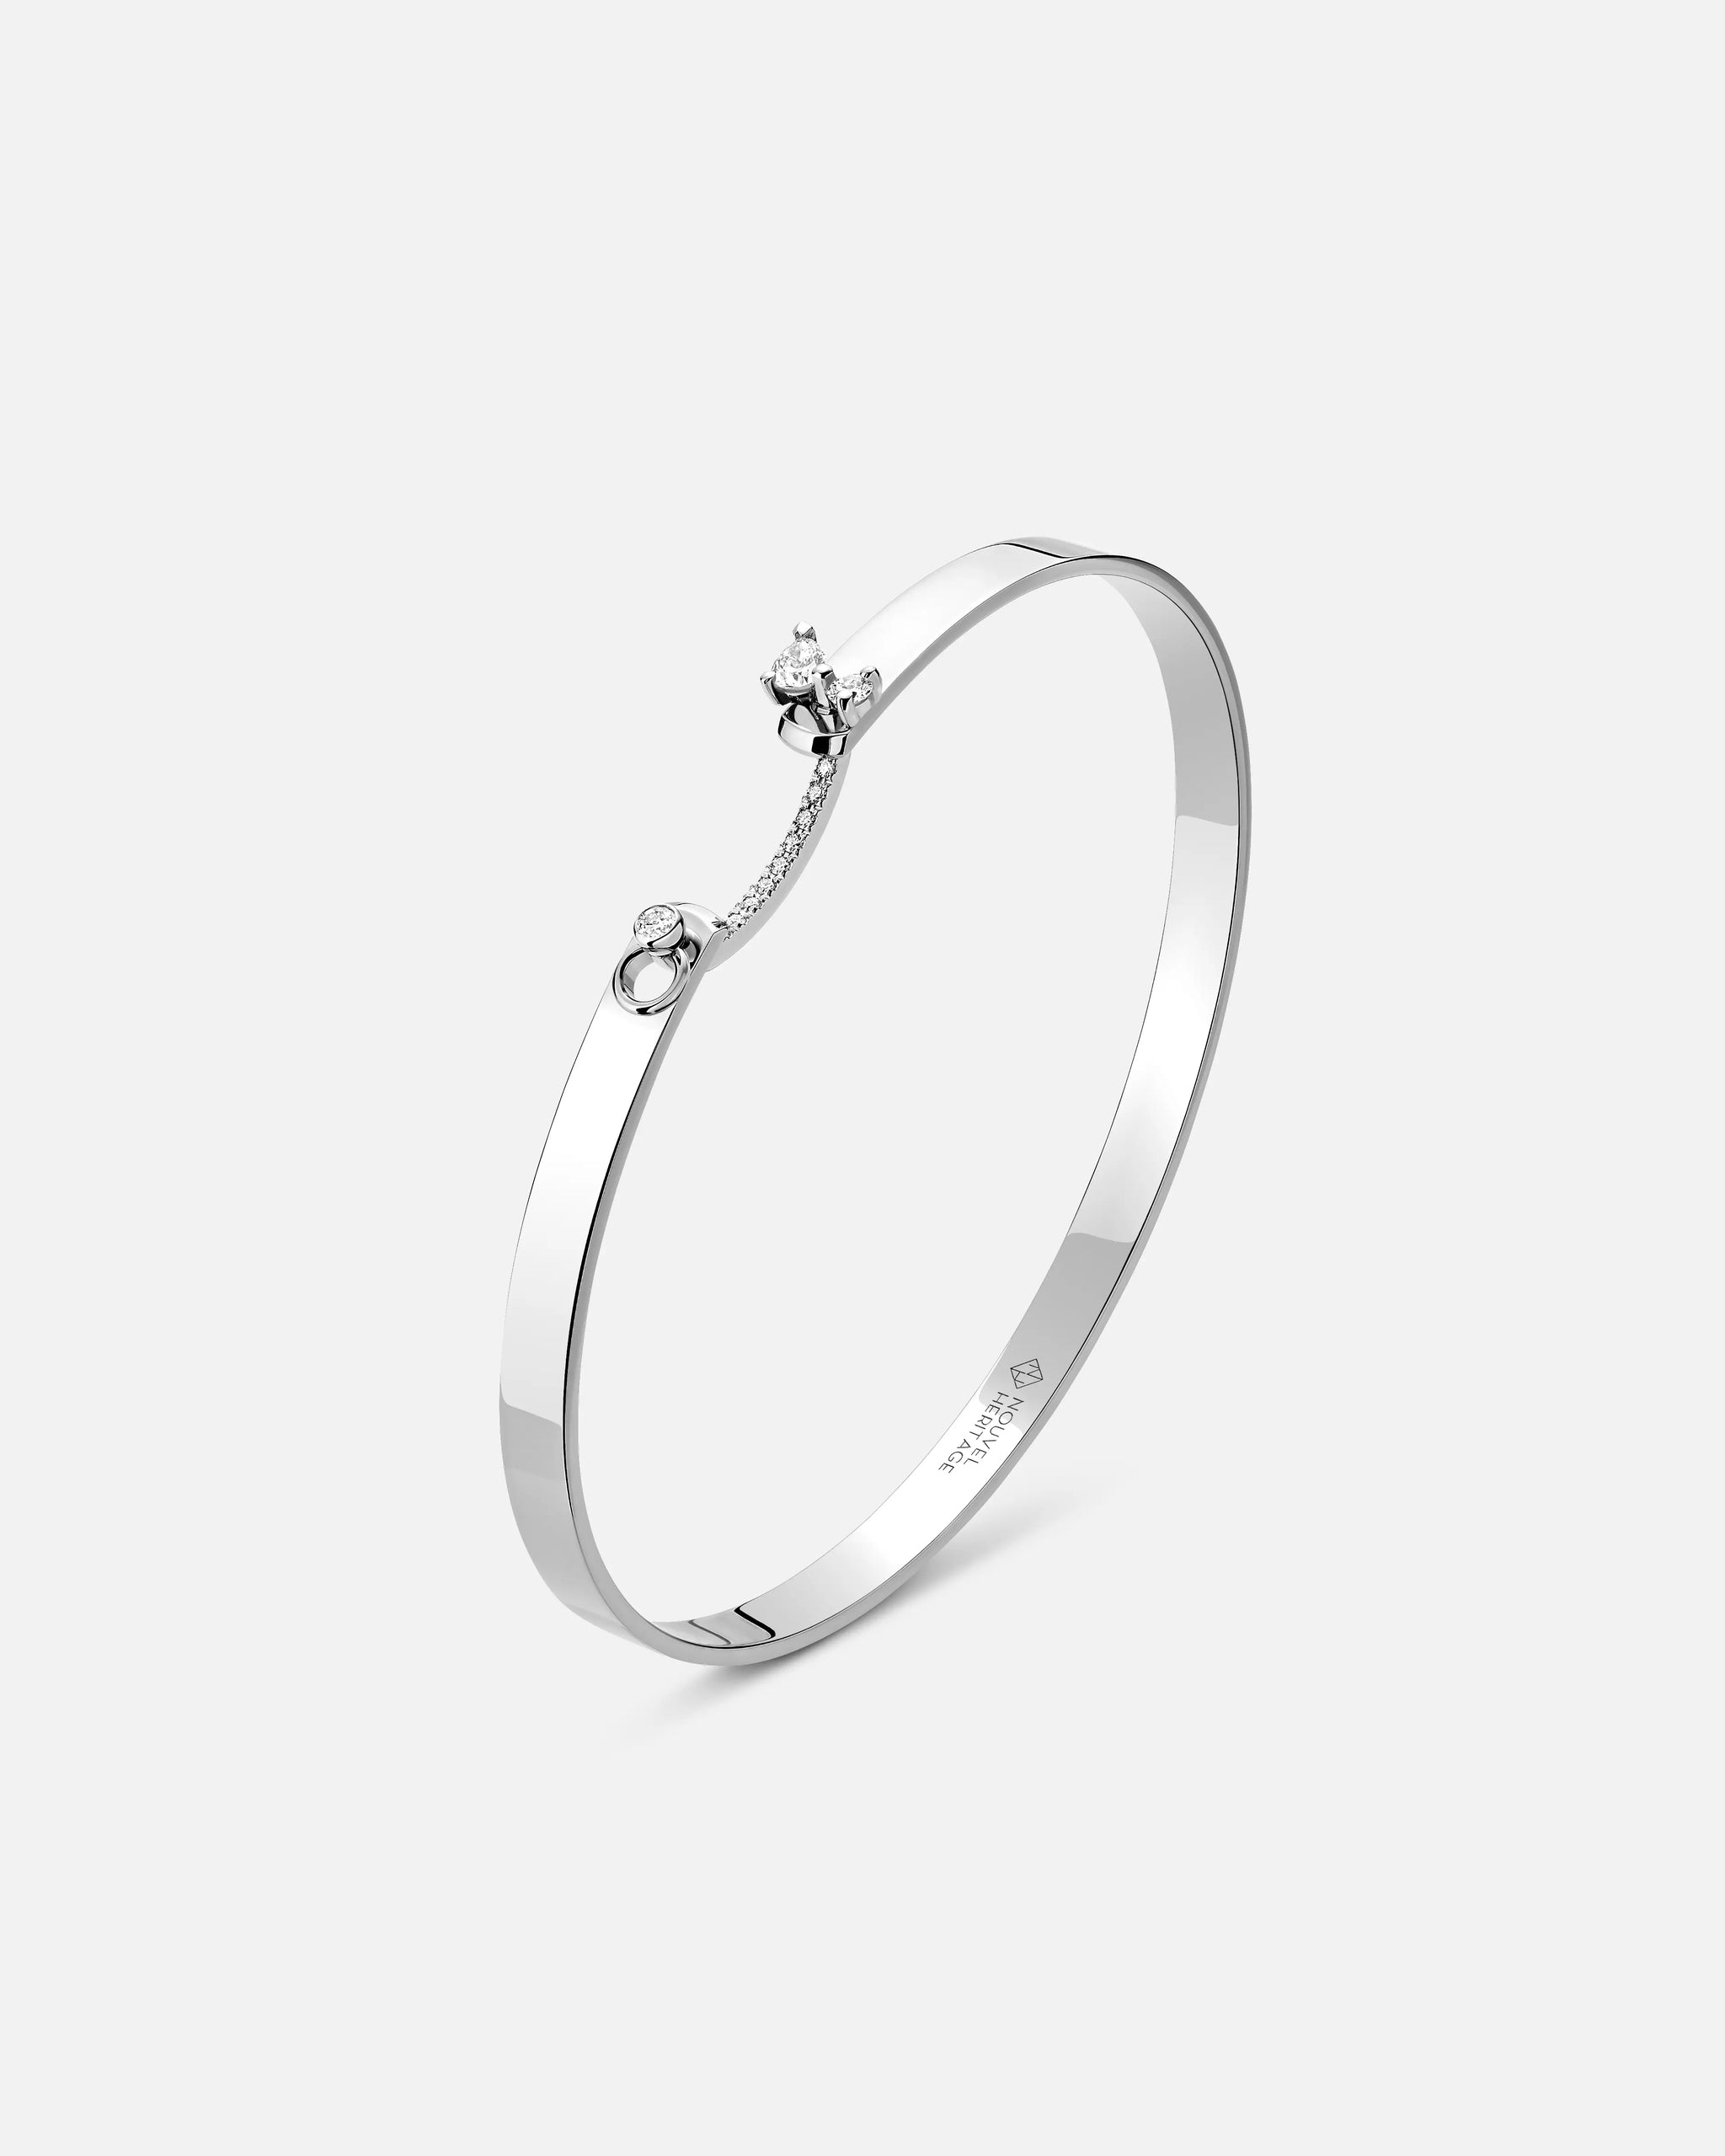 Cocktail Time Mood Bangle in White Gold - 1 - Nouvel Heritage